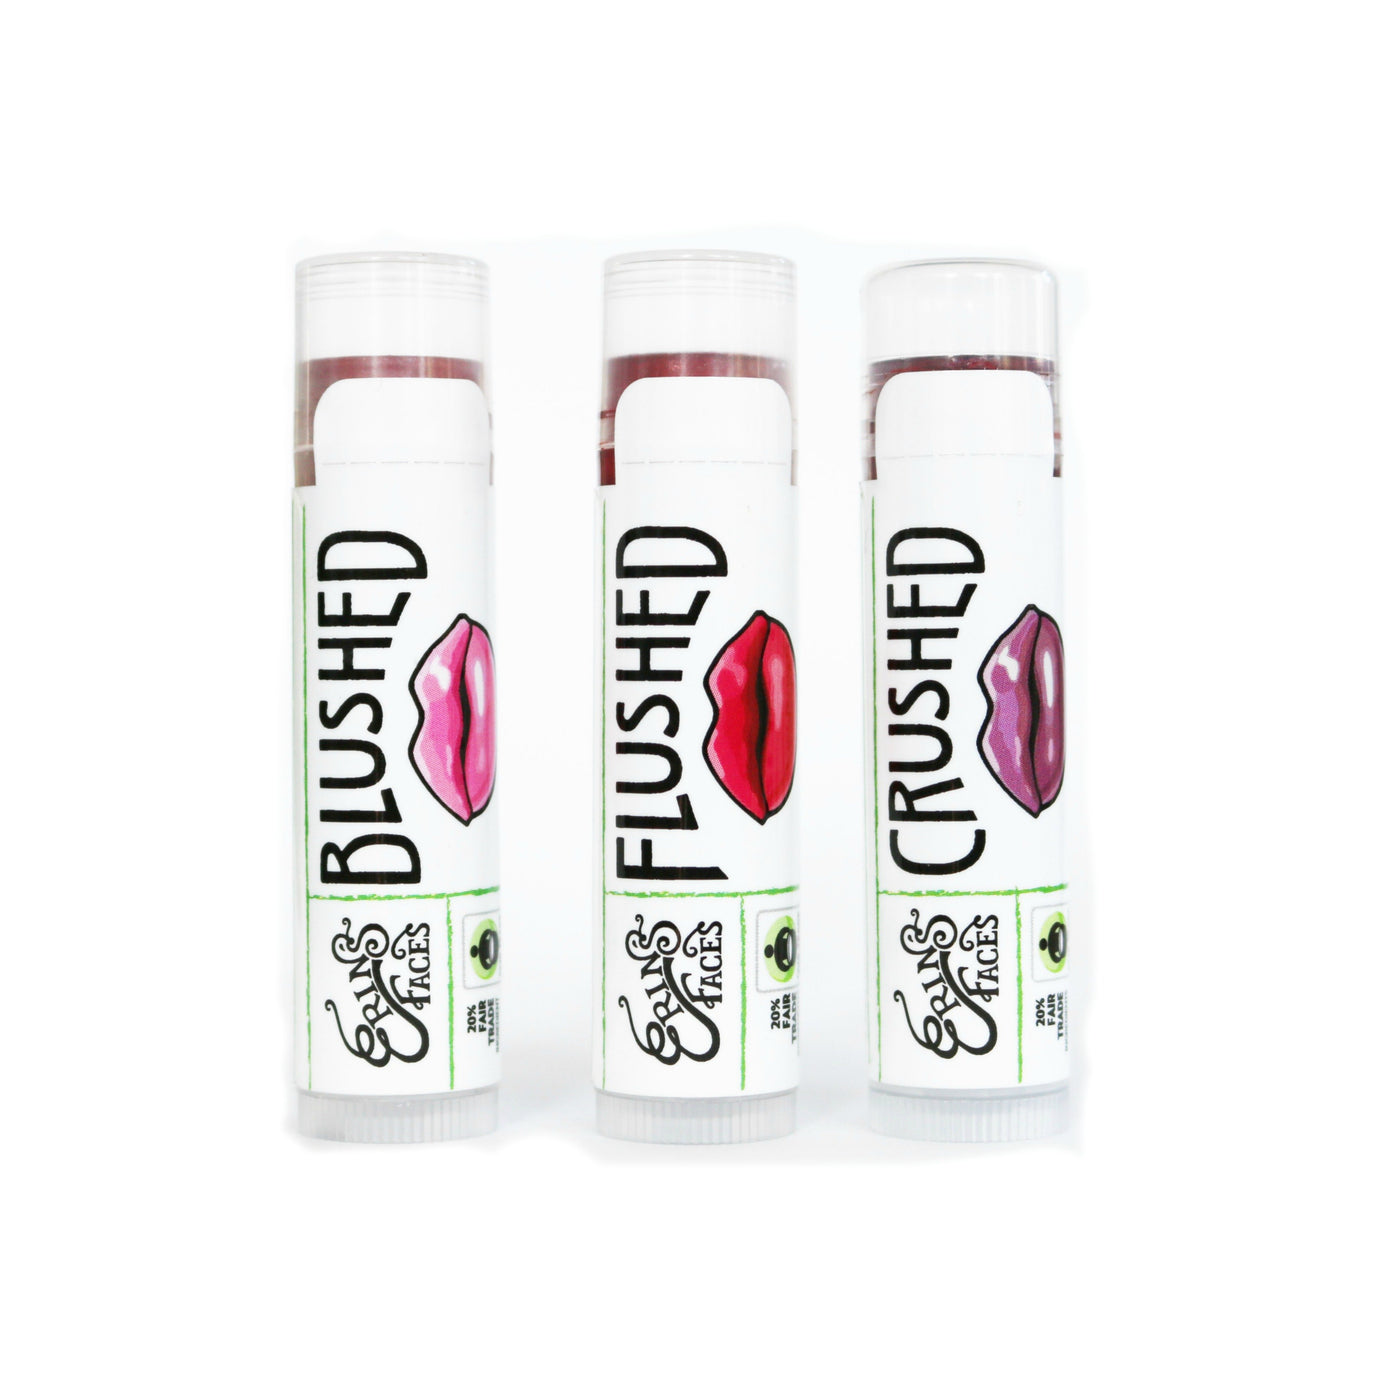 set of hydration tinted lip balm makeup in colors crushed, blushed and flushed